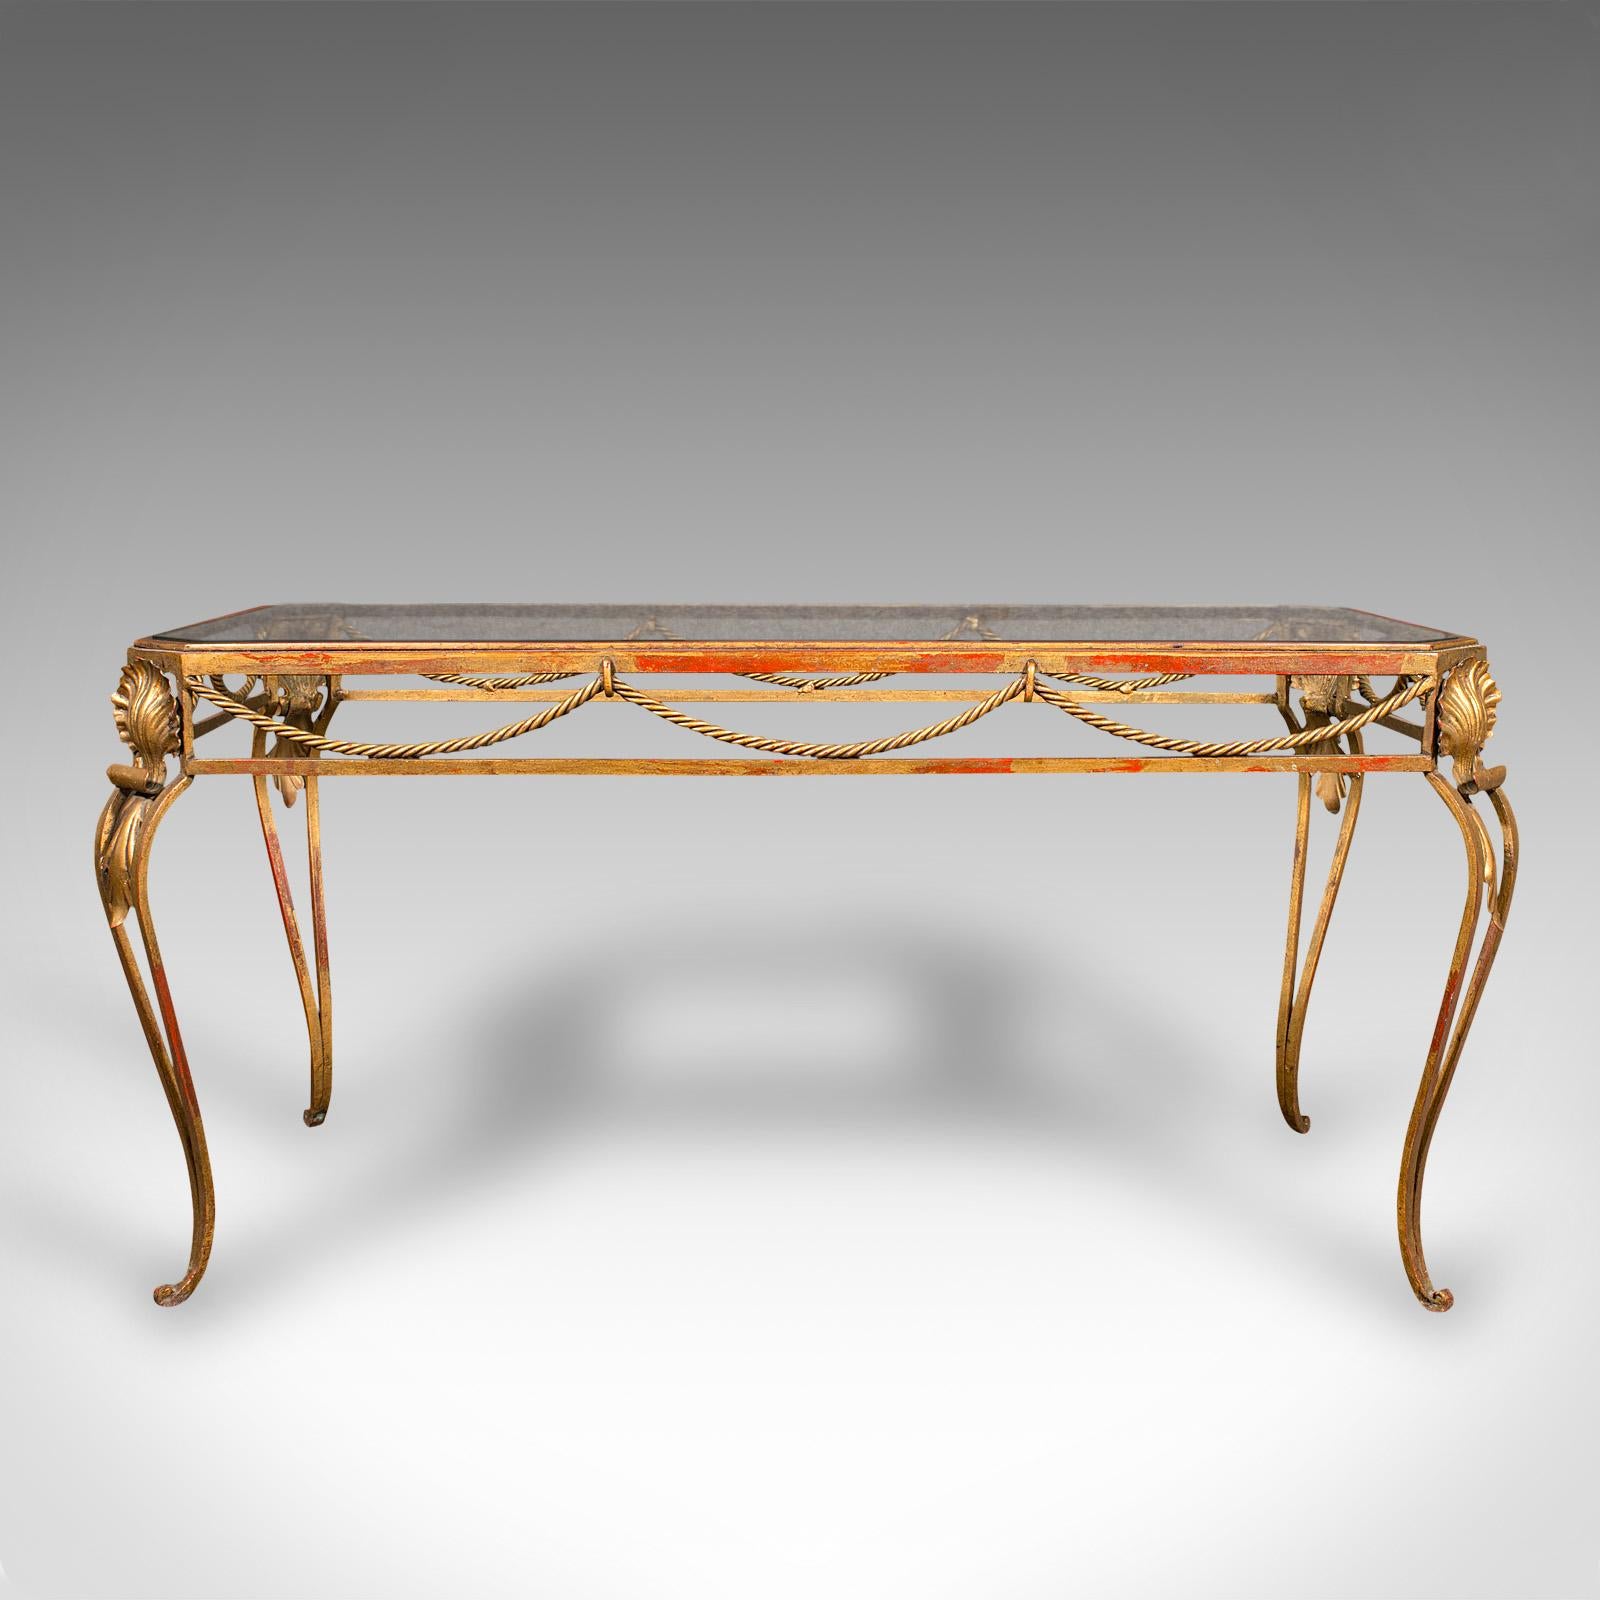 Antique Glazed Coffee Table, French, Brass, Art Nouveau, Early 20th, Circa 1920 For Sale 1